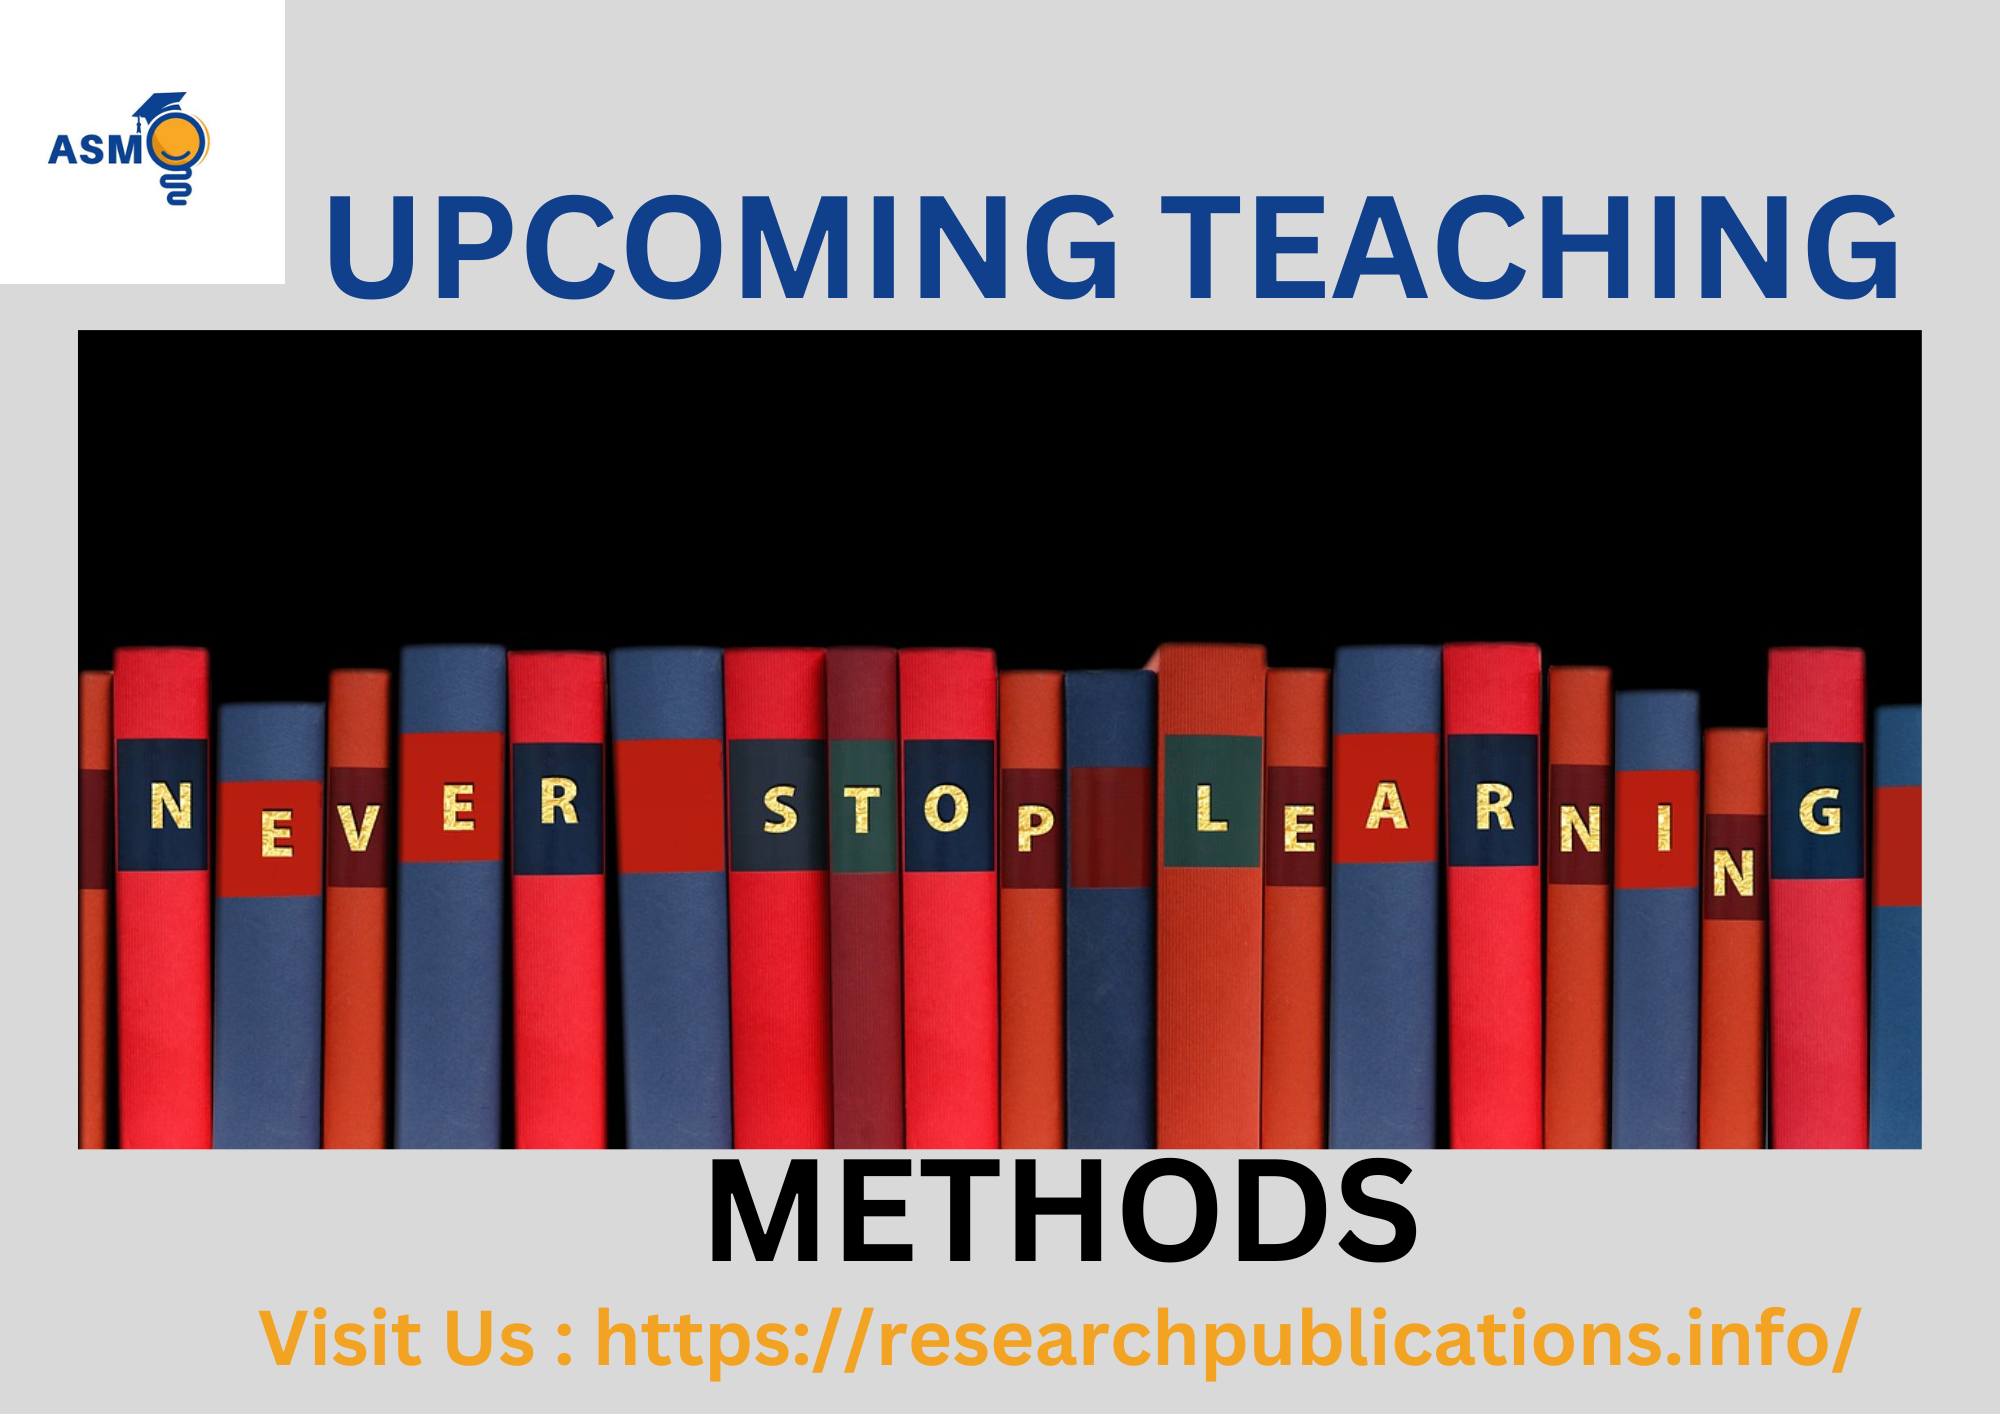 UPCOMING CHANGES IN TEACHING IN HIGHER EDUCATION, The COVID-19 pandemic, Advances in technology, Changing student demographics, • Increased use of online and blended Learning, Active Learning, More engaging and interactive learning...